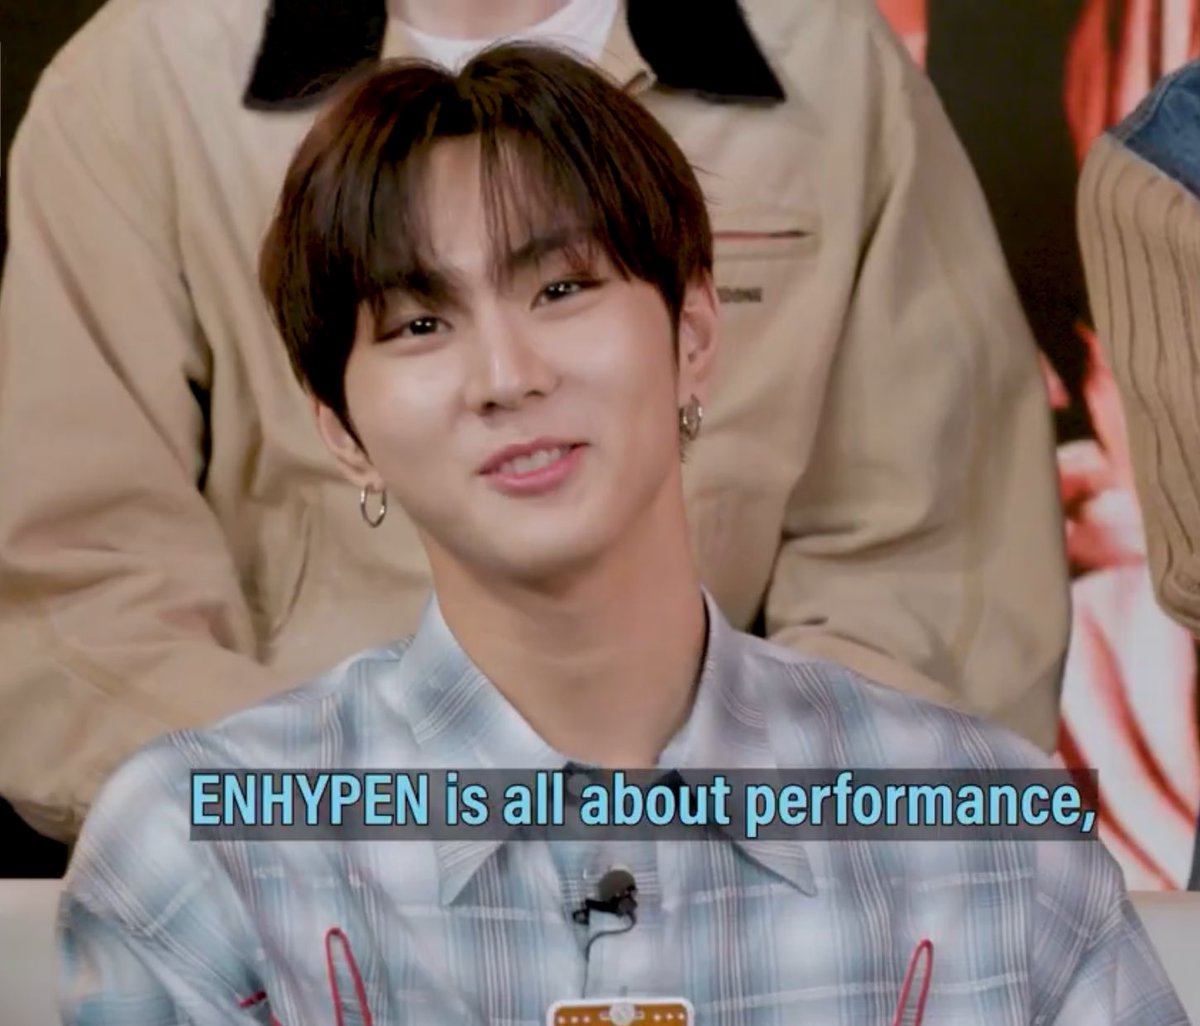 “ENHYPEN is all about performance”